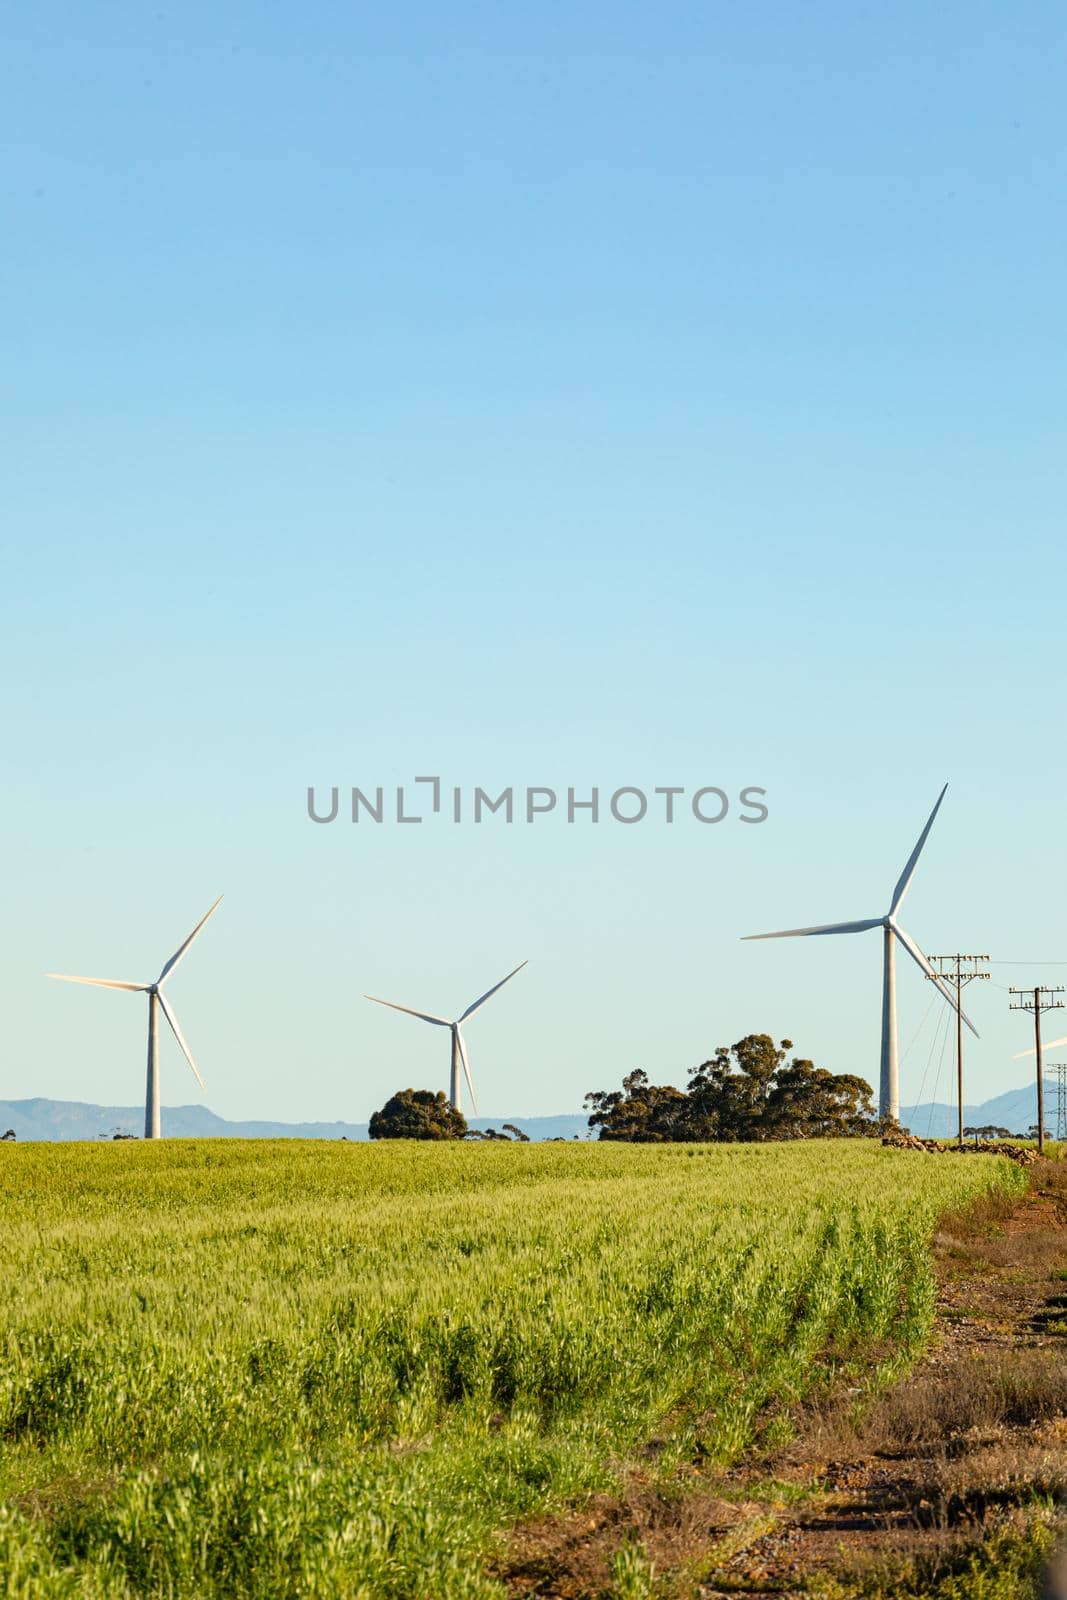 General view of wind turbines in countryside landscape with cloudless sky. environment, sustainability, ecology, renewable energy, global warming and climate change awareness.